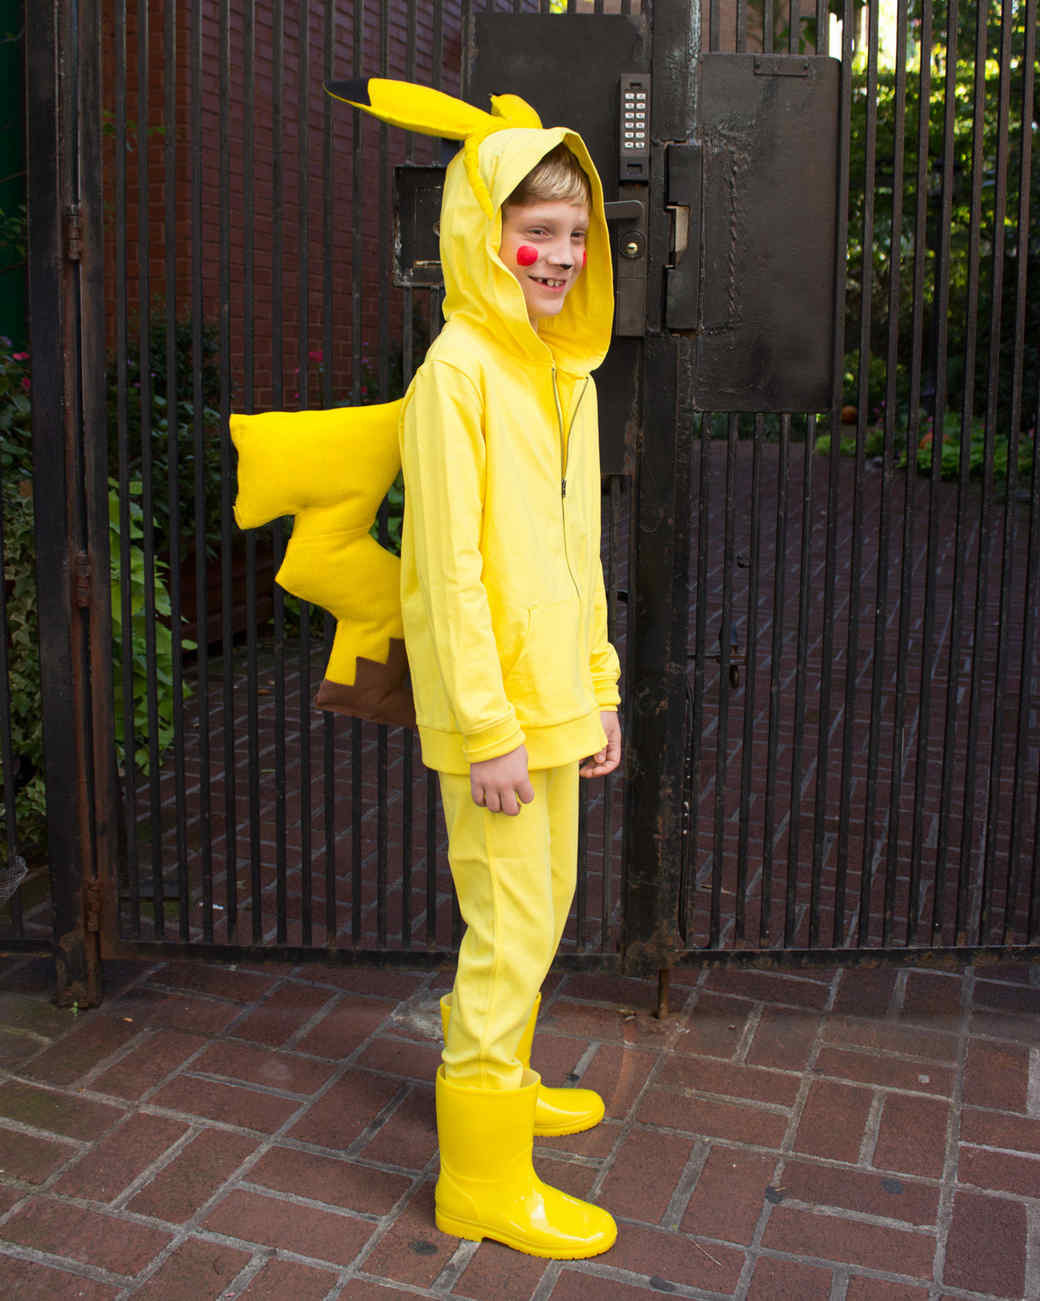 DIY Pikachu Costume
 You Can Make This Pikachu Costume Using Pajamas and a Few